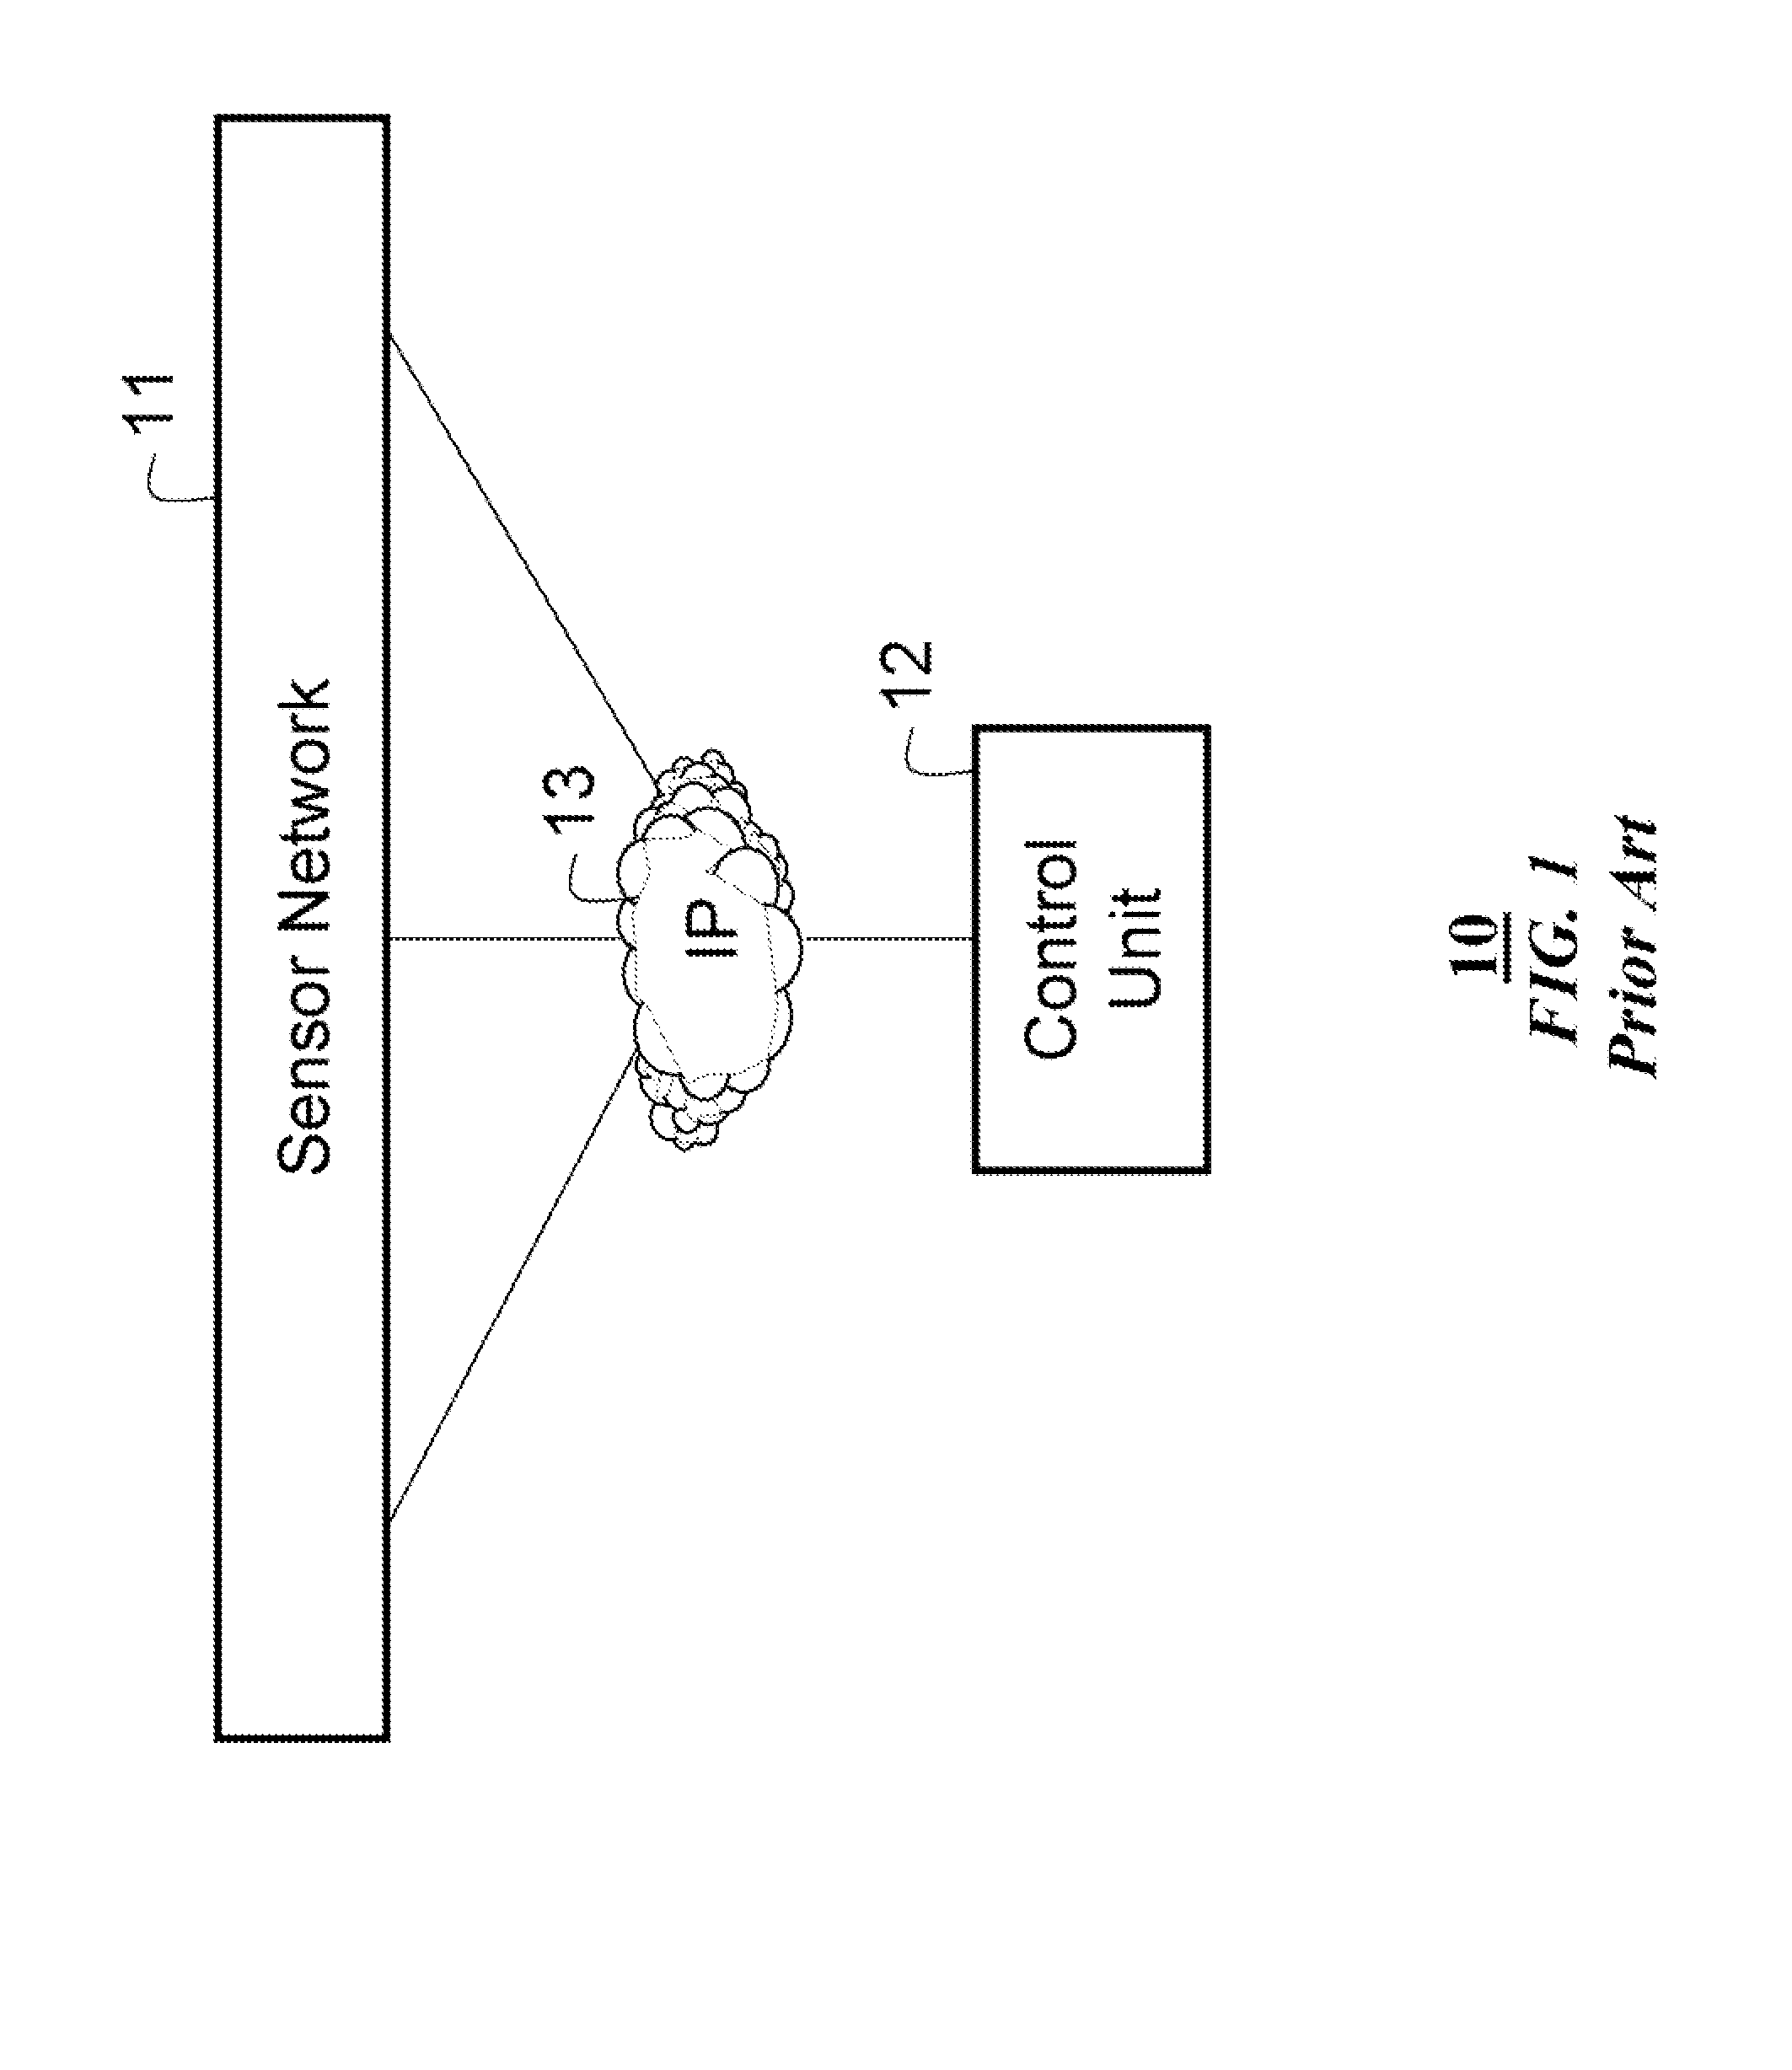 System and Method for Measuring Performances of Surveillance Systems